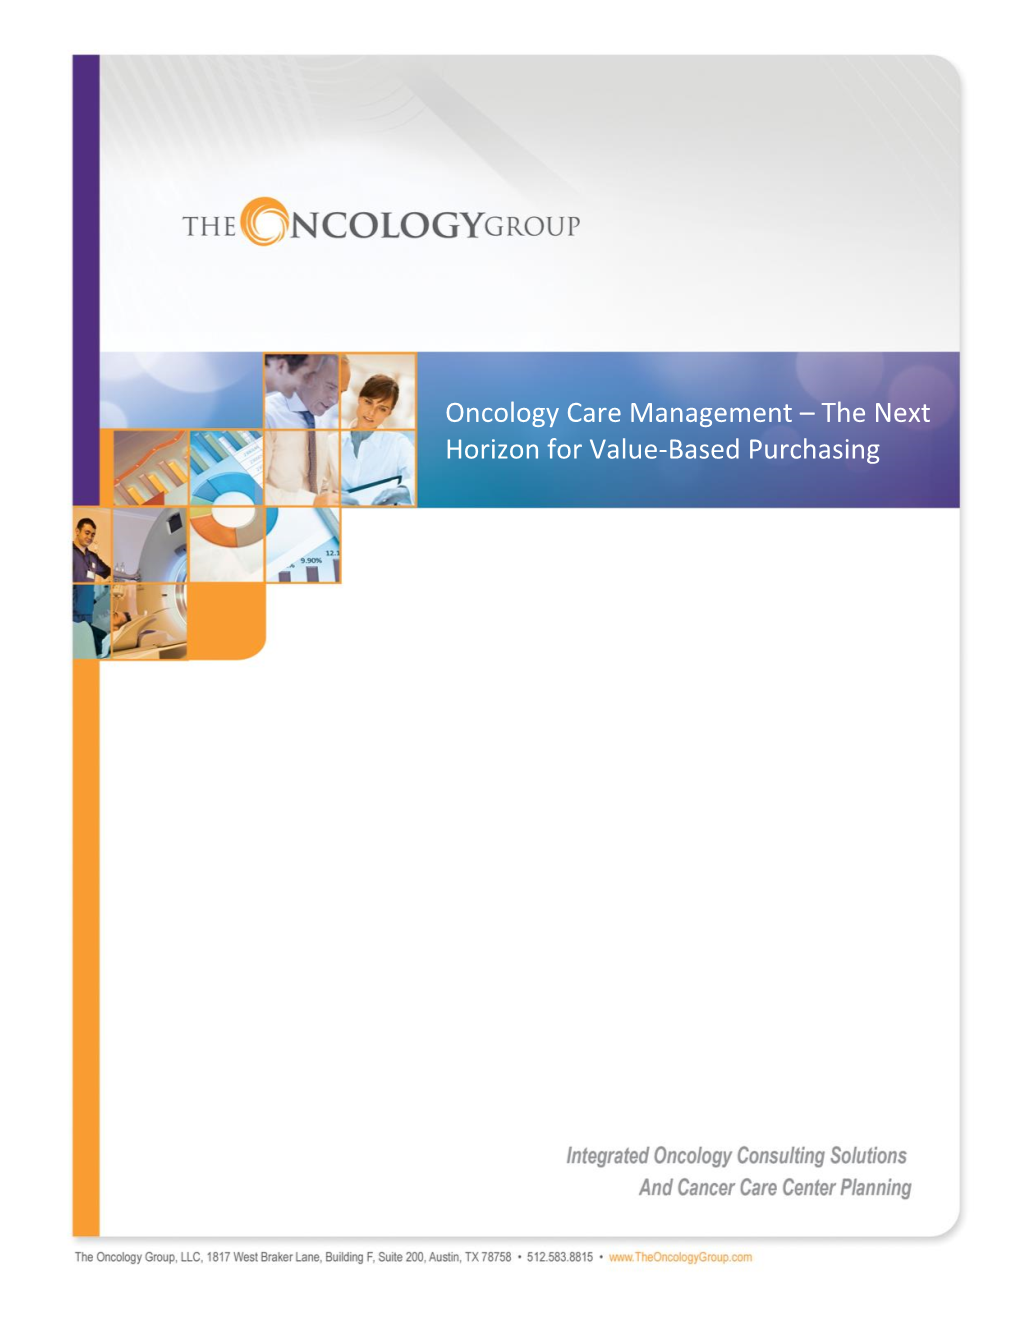 Oncology Care Management – the Next Horizon for Value-Based Purchasing